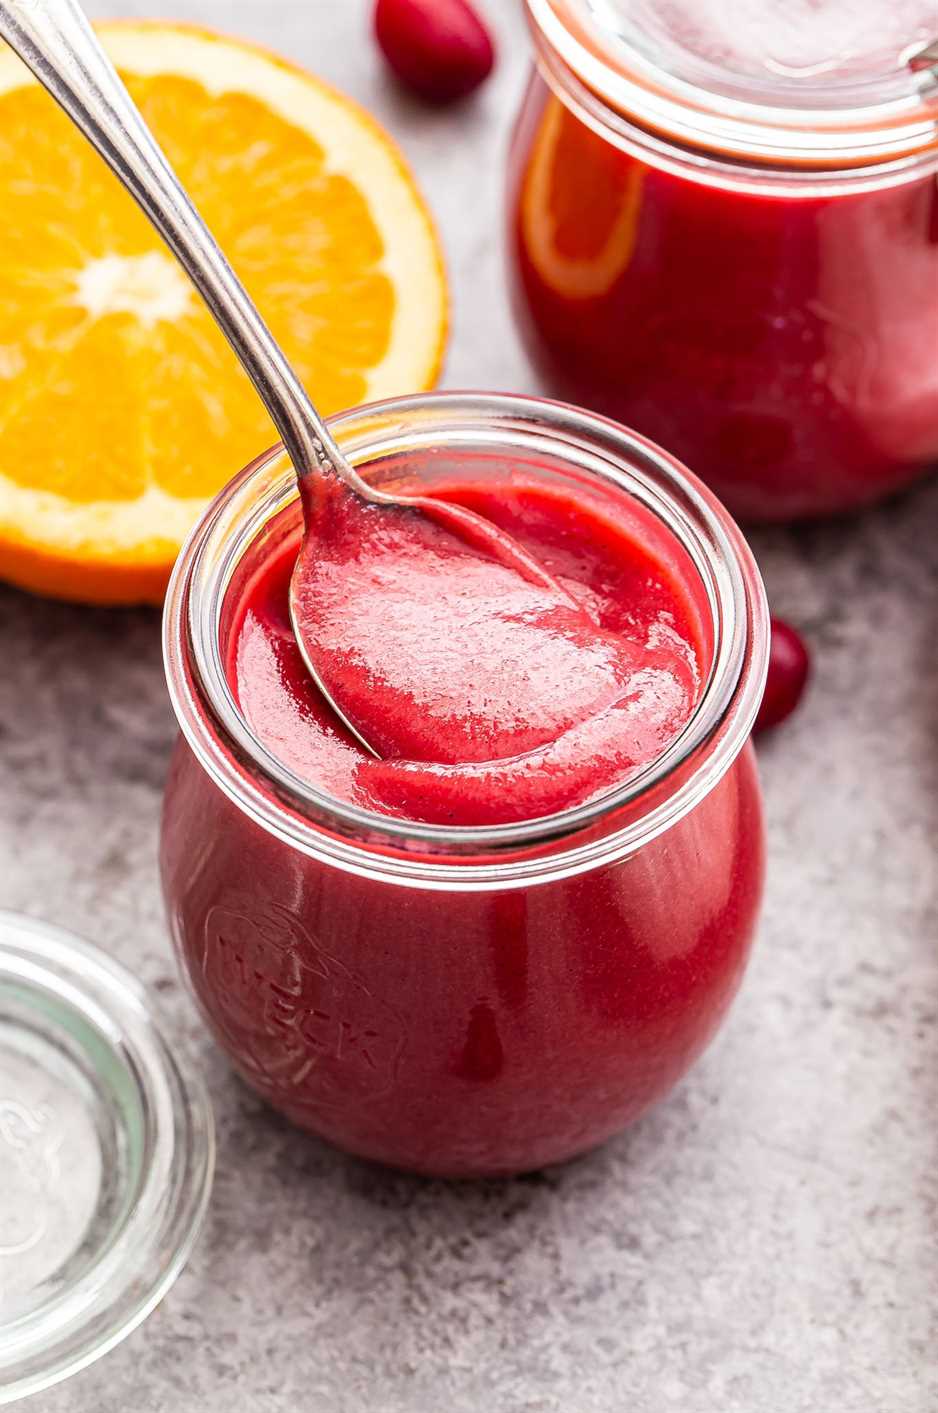 spoon dipping into a jar of cranberry orange curd